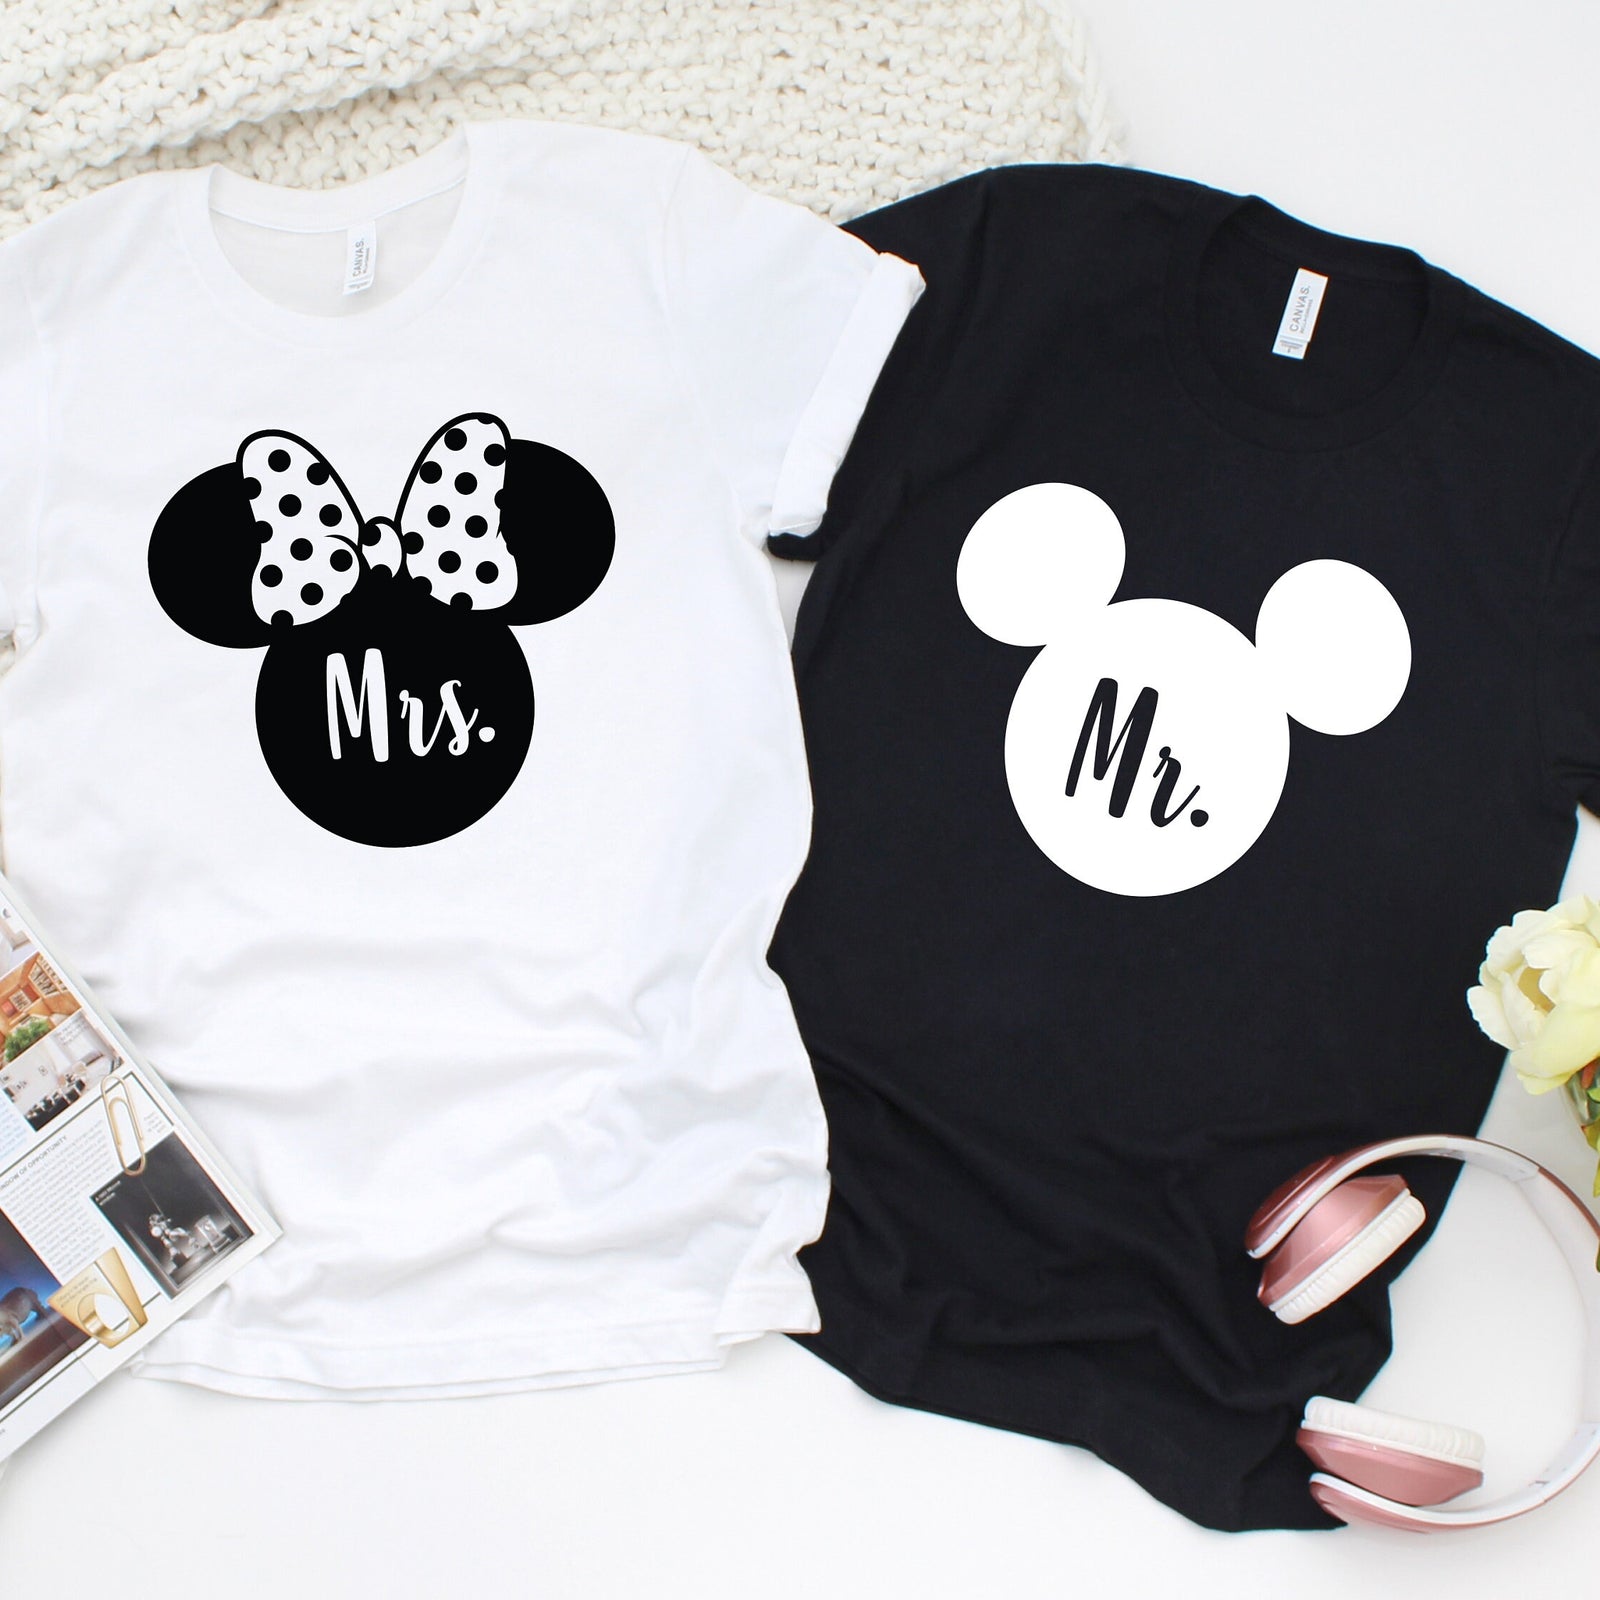 Mr. and Mrs. Minnie and Mickey Mouse Matching Disney Shirts - Disney Couples - Honeymoon